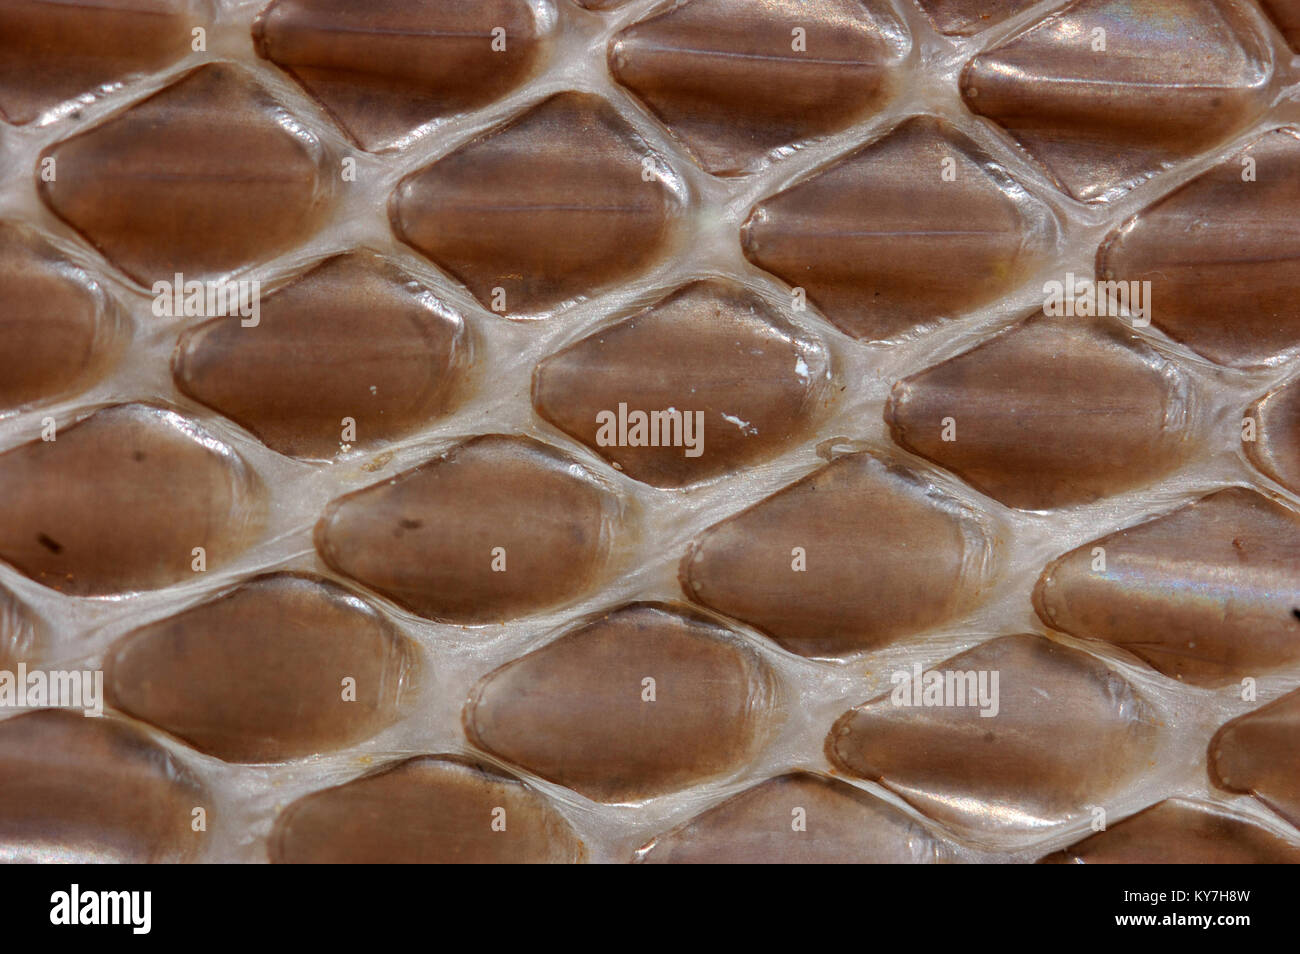 detail of scales on shed snake skin Stock Photo